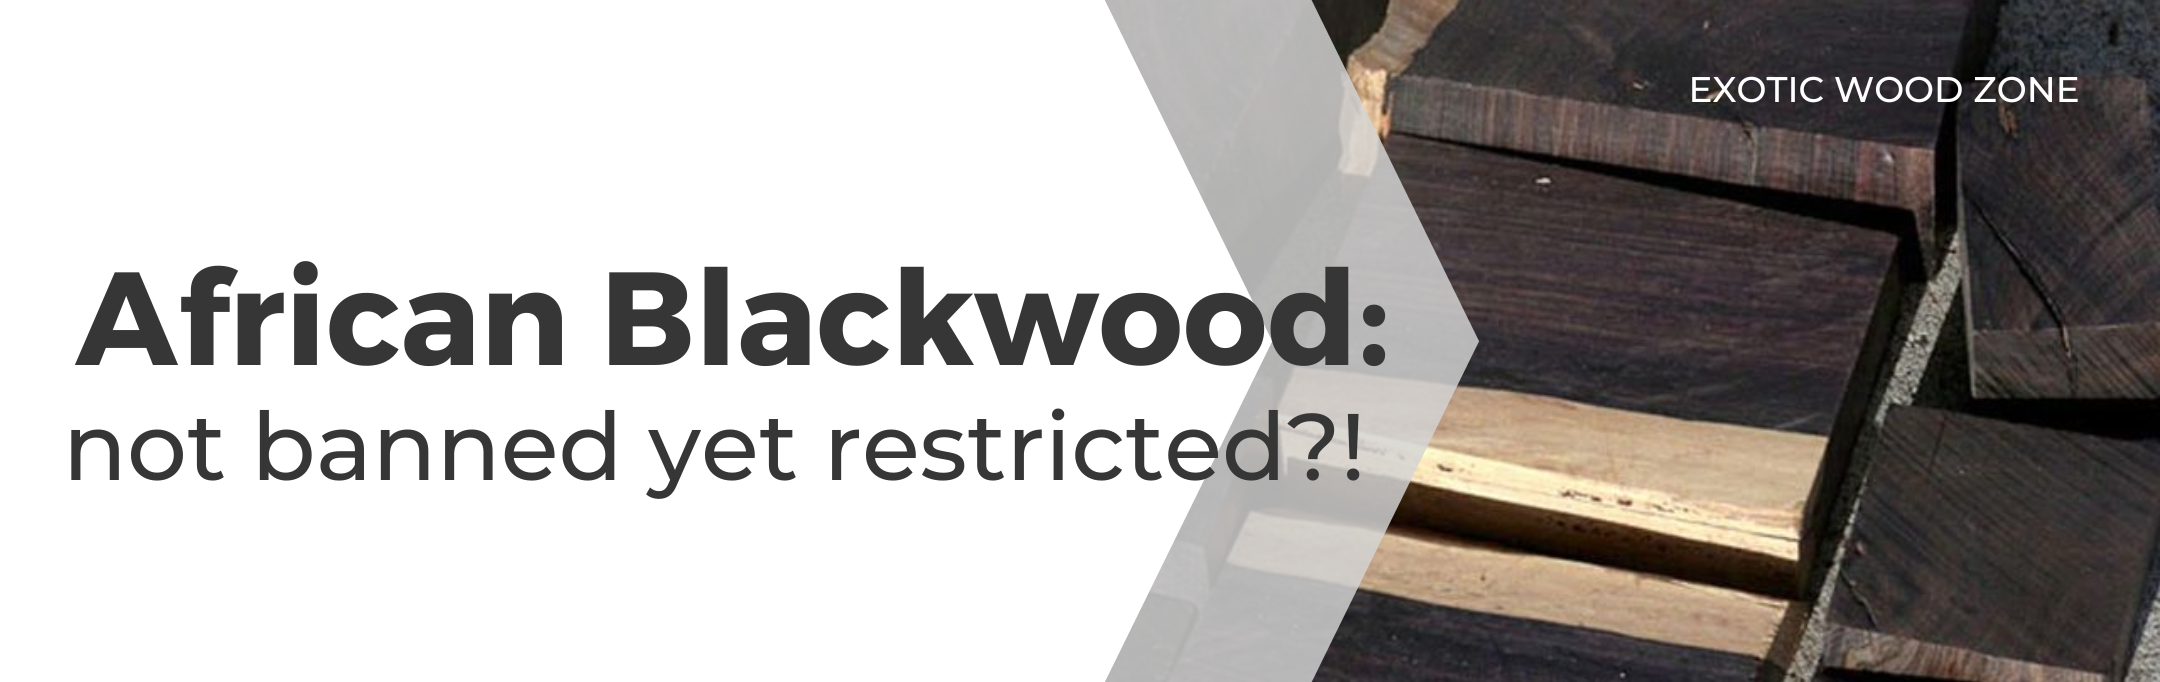 AFRICAN BLACKWOOD: NOT BANNED YET RESTRICTED?!